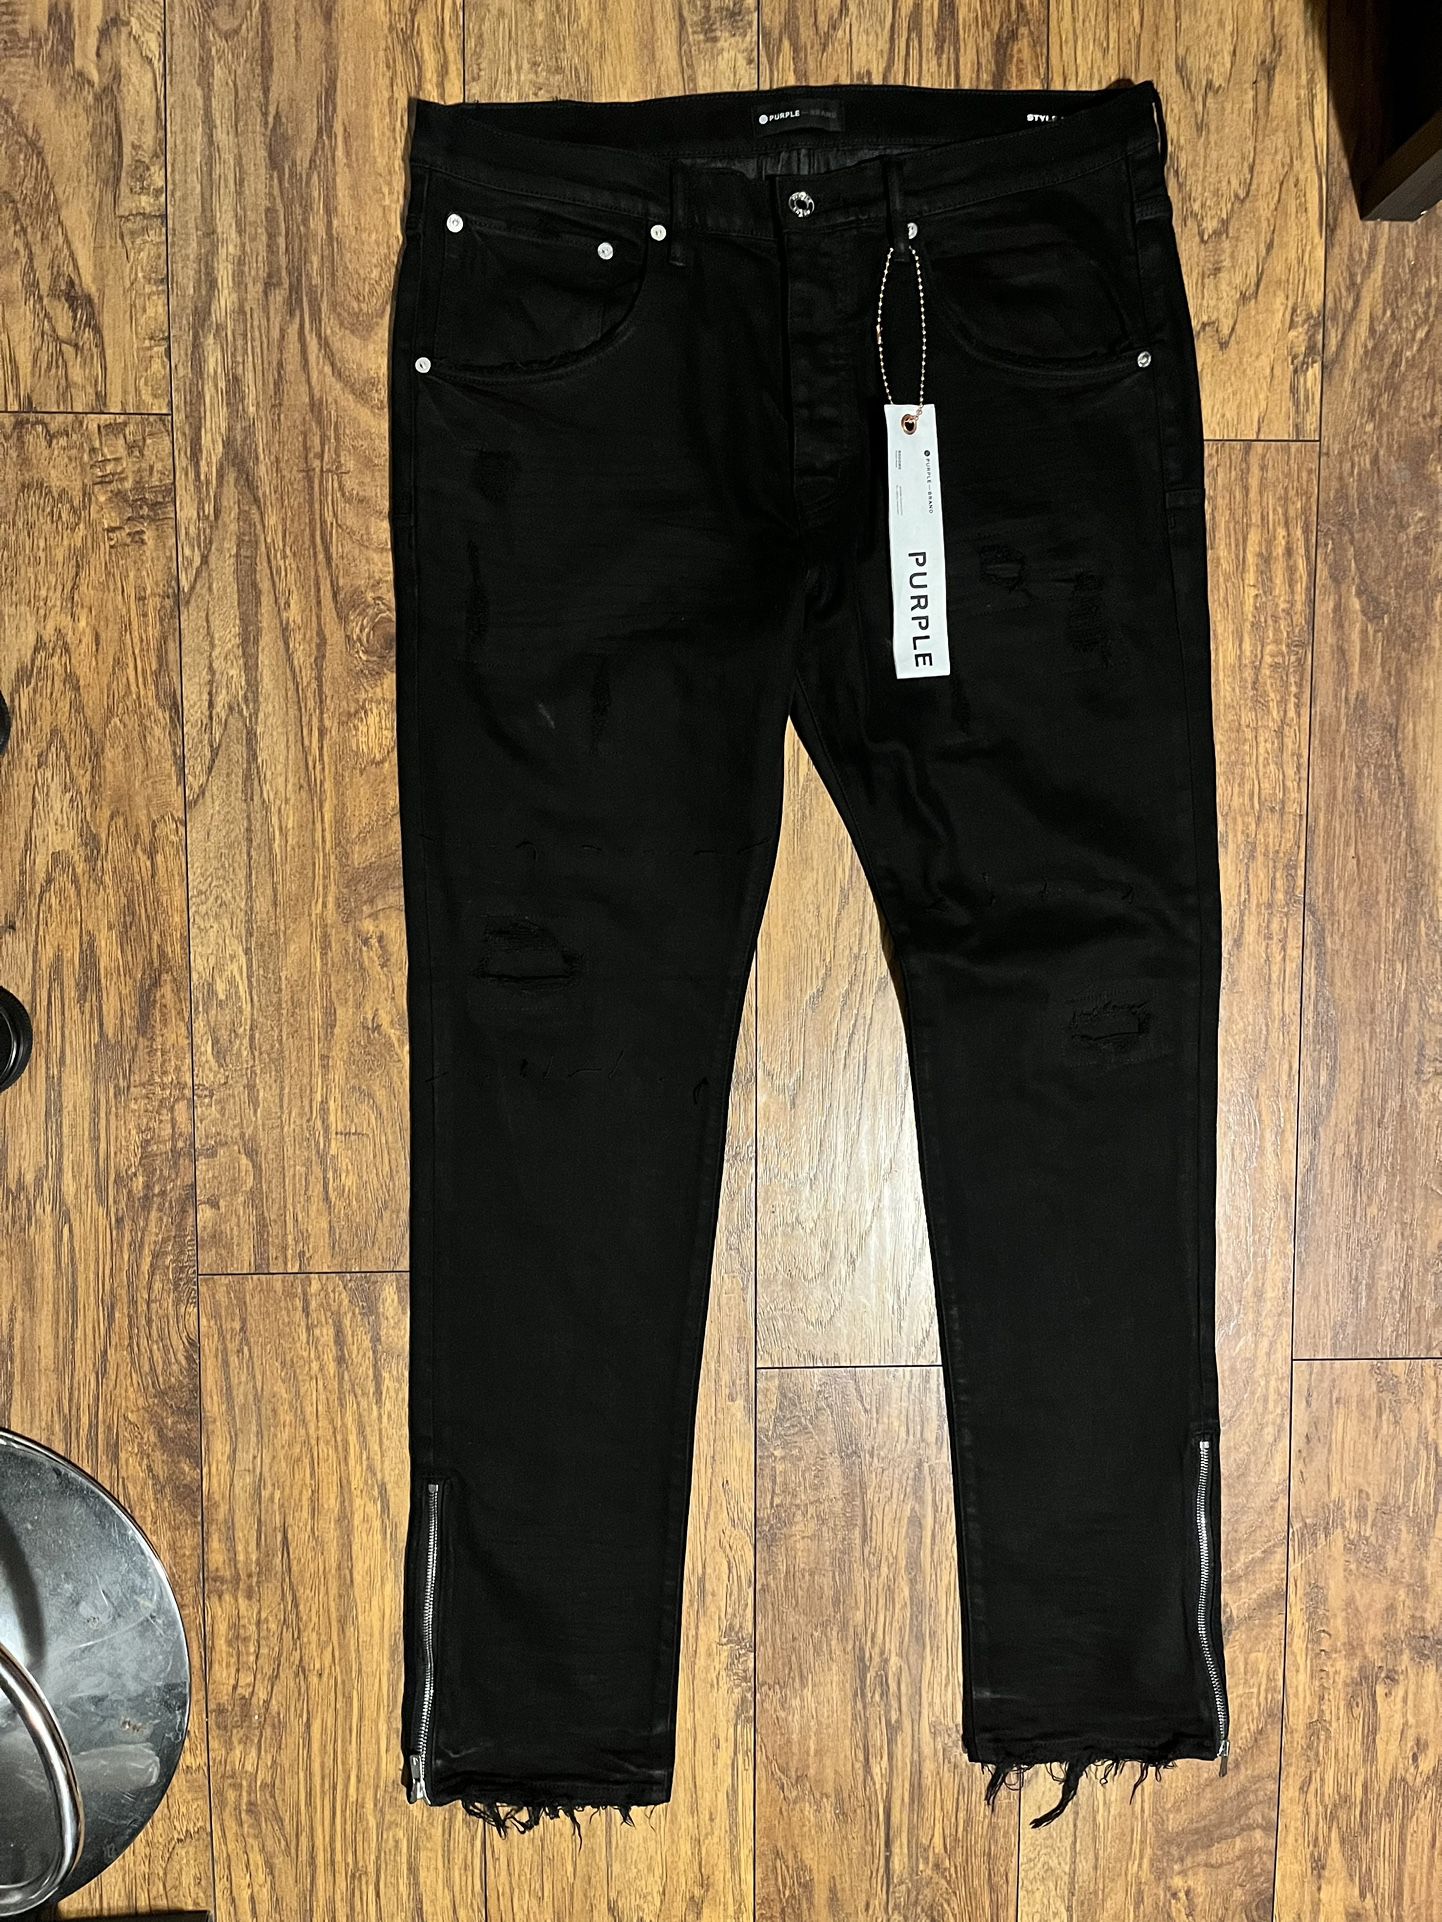 Purple Brand Jeans Not Firm On Price for Sale in Santa Clarita, CA - OfferUp